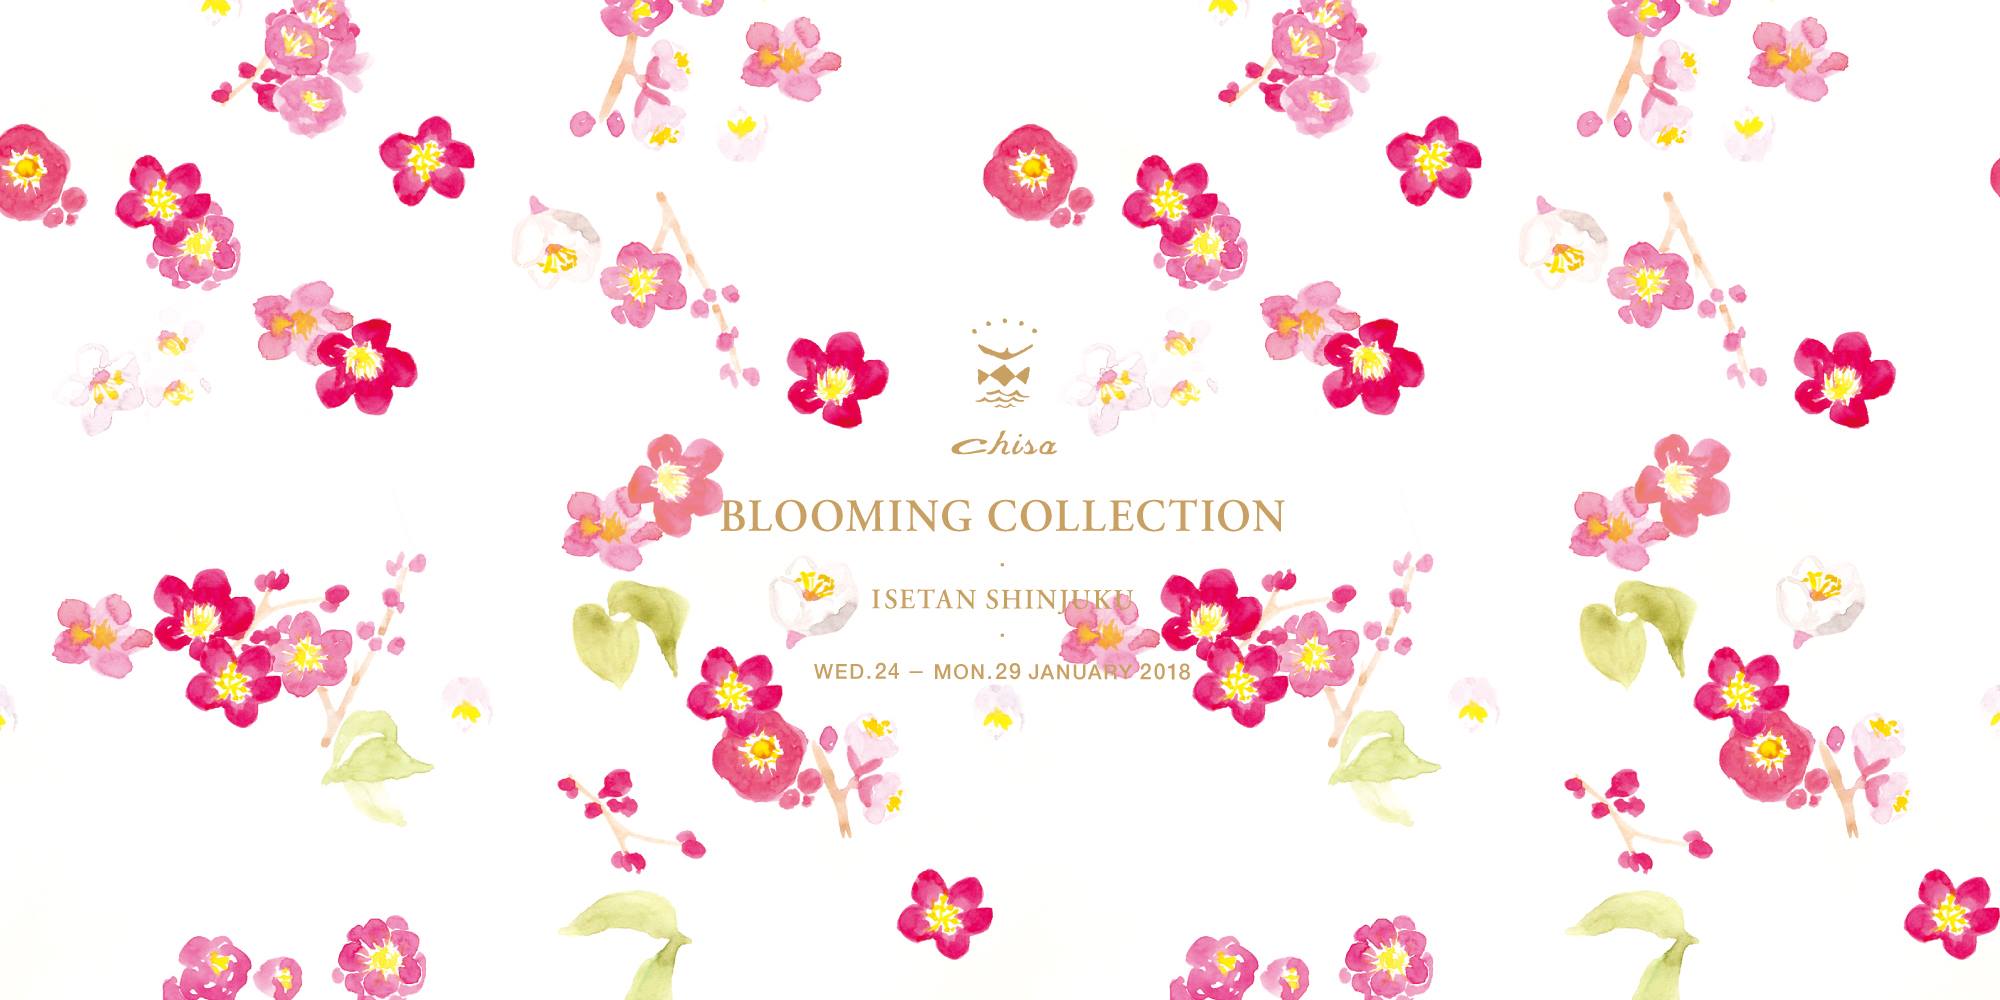 BLOOMING COLLECTION